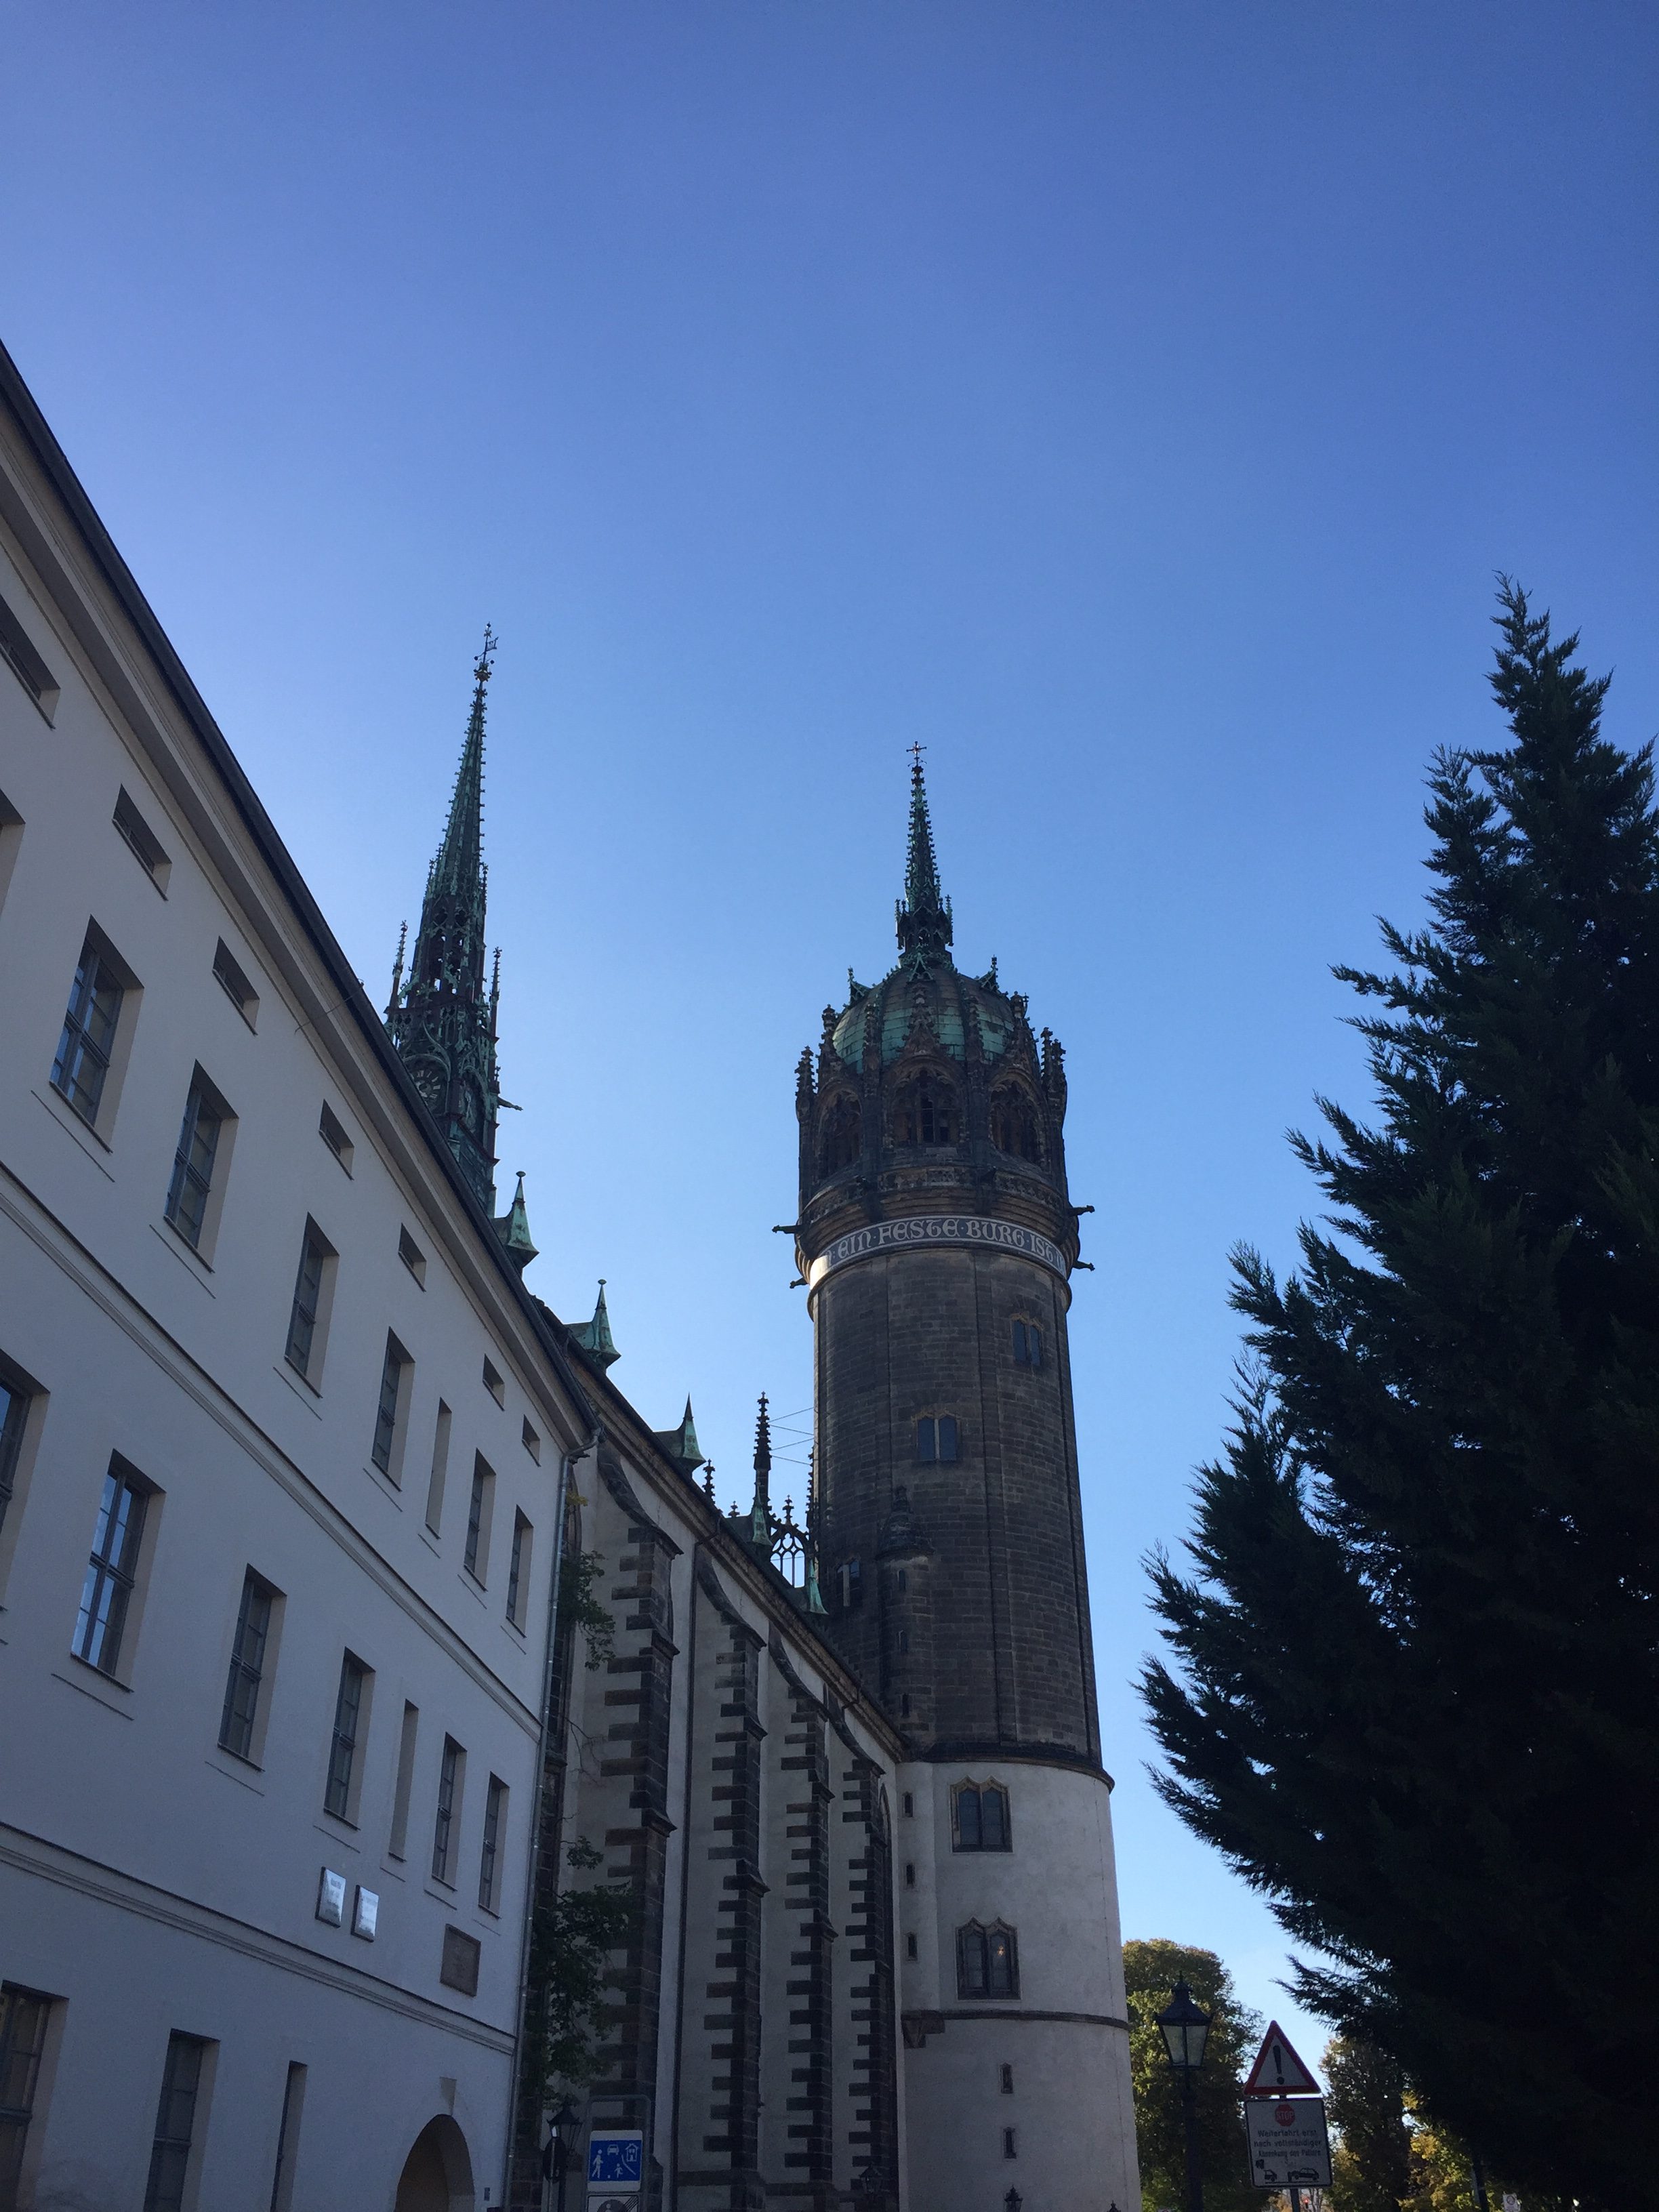 Making Mends in Wittenberg